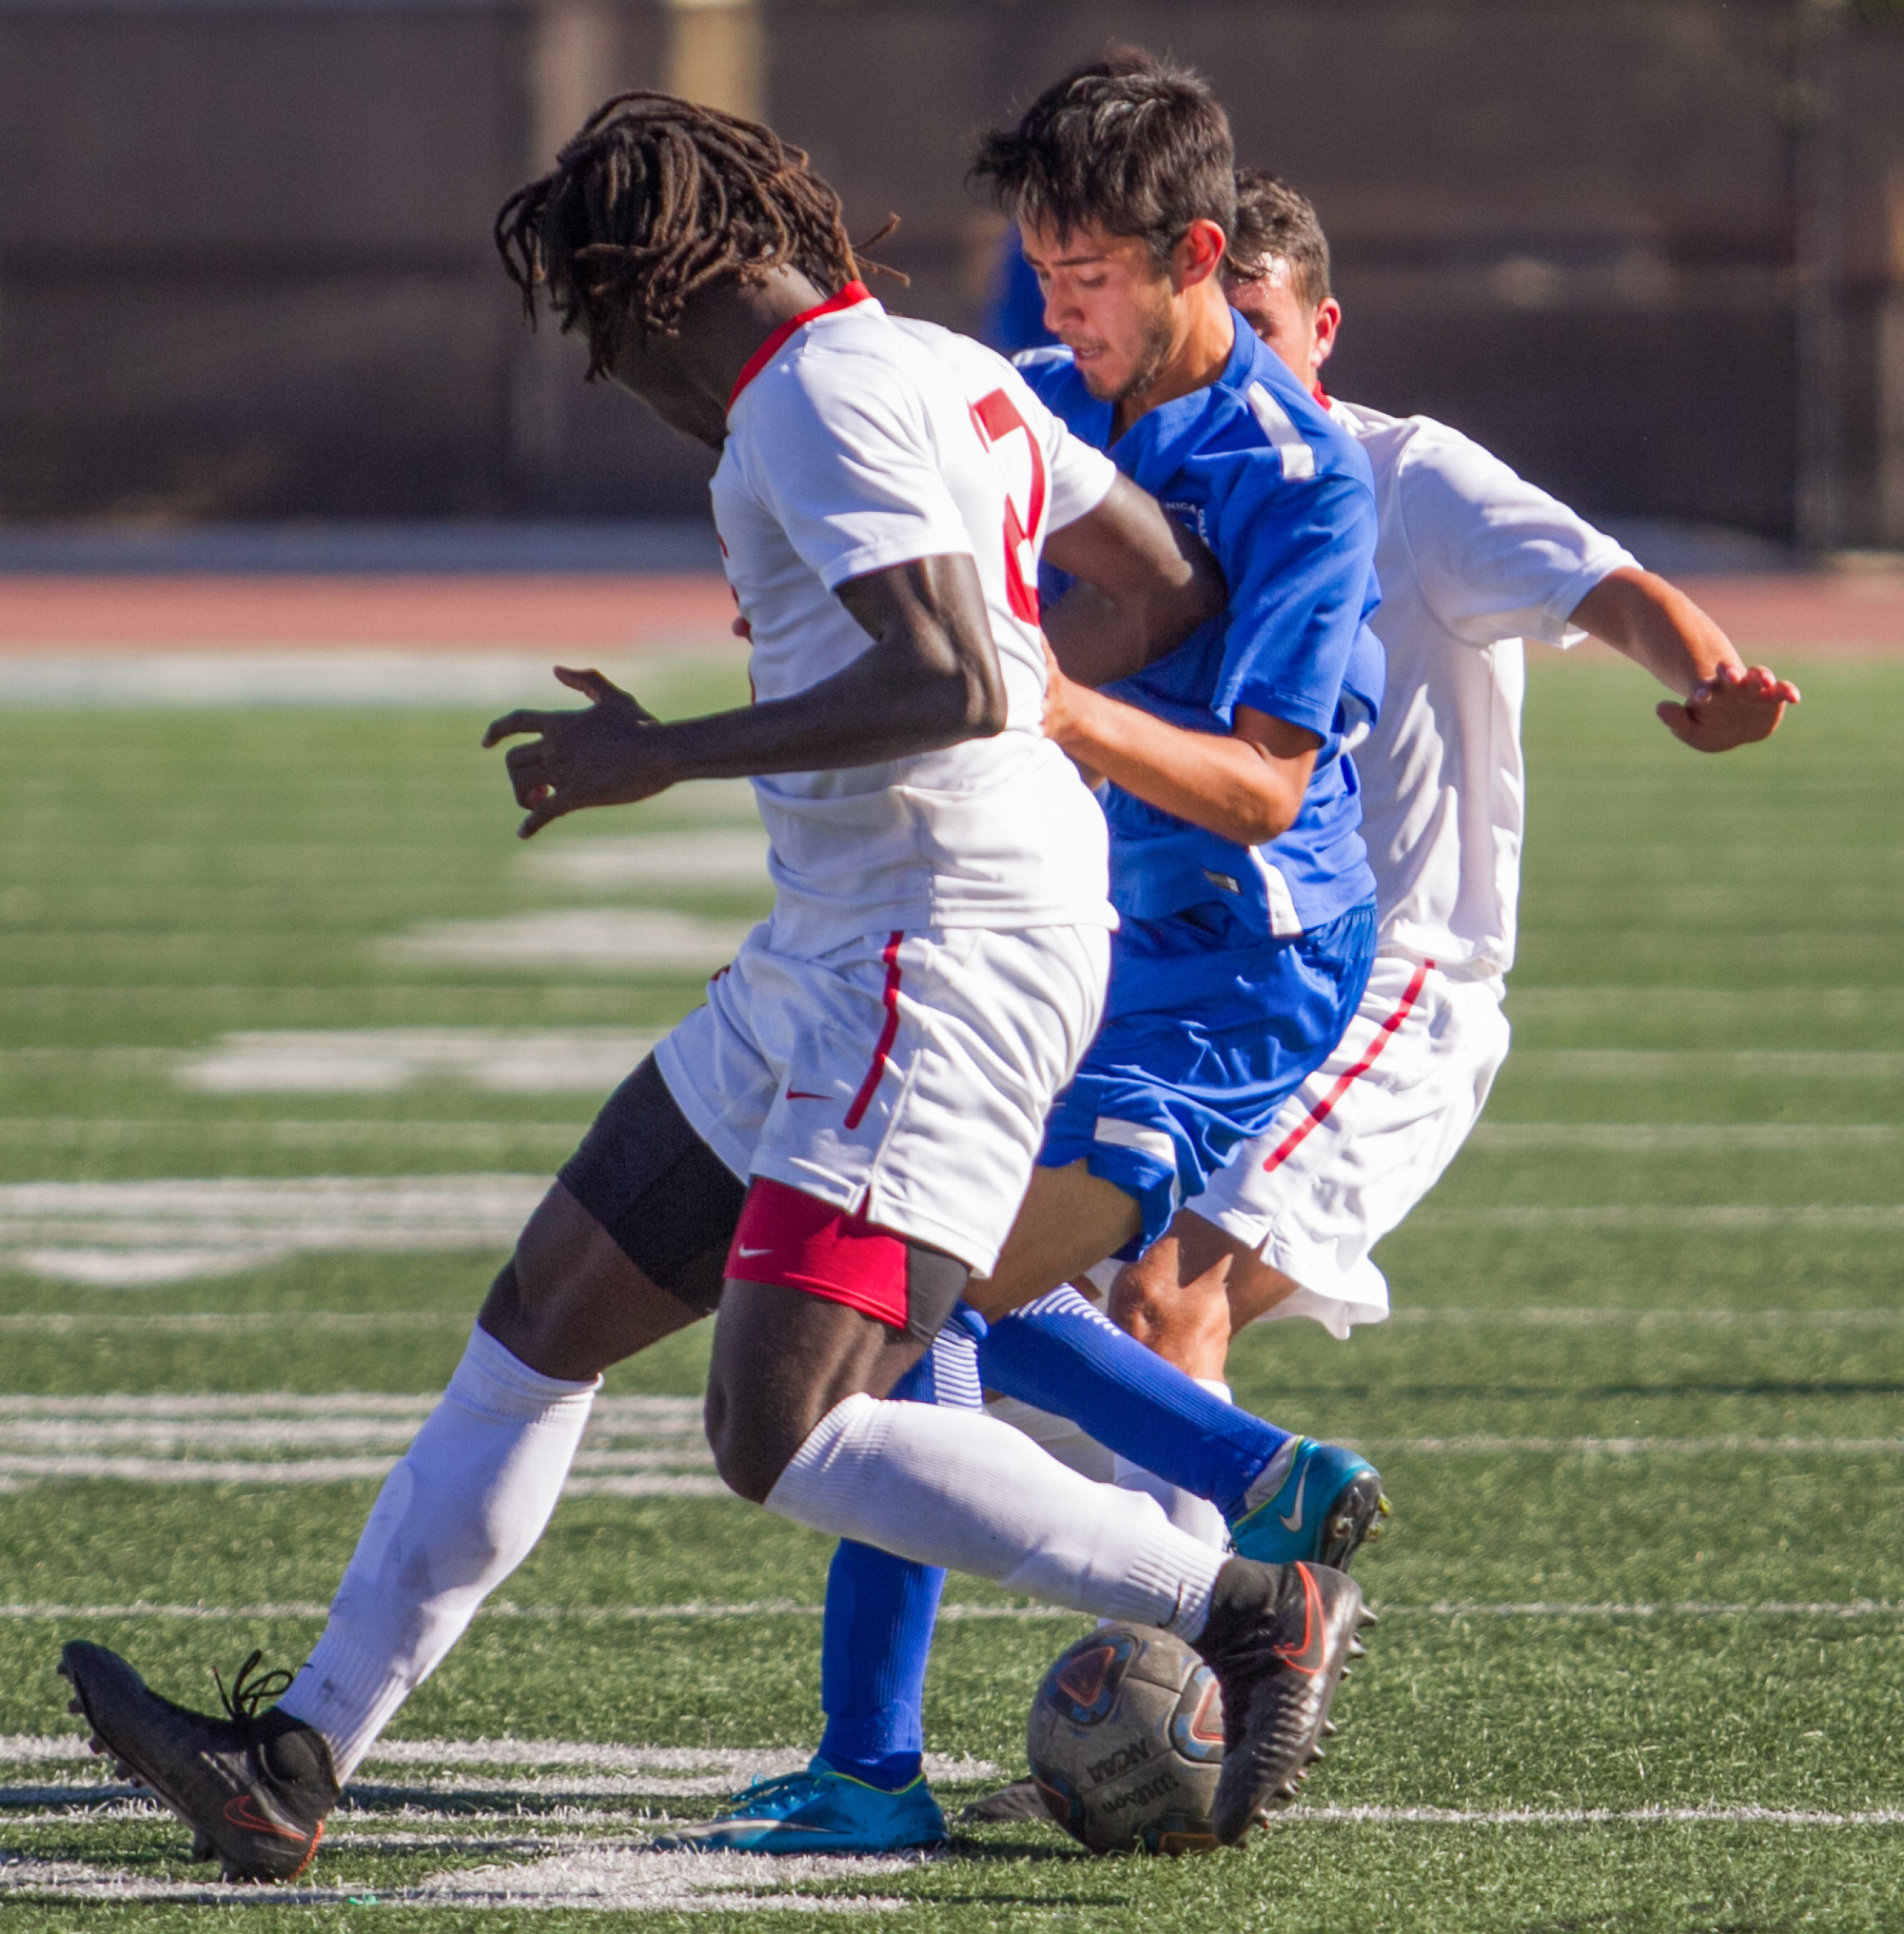  Santa Monica College Corsair Carlos Rincon (16)(CTR) fights for possession of the ball against Santa Barbara City College Vaqueros Hudson Handel (27)(L) and Jessie Jimenez (8)(R) on Tuesday, October 24, 2017, on the Corsair Field at Santa Monica Col